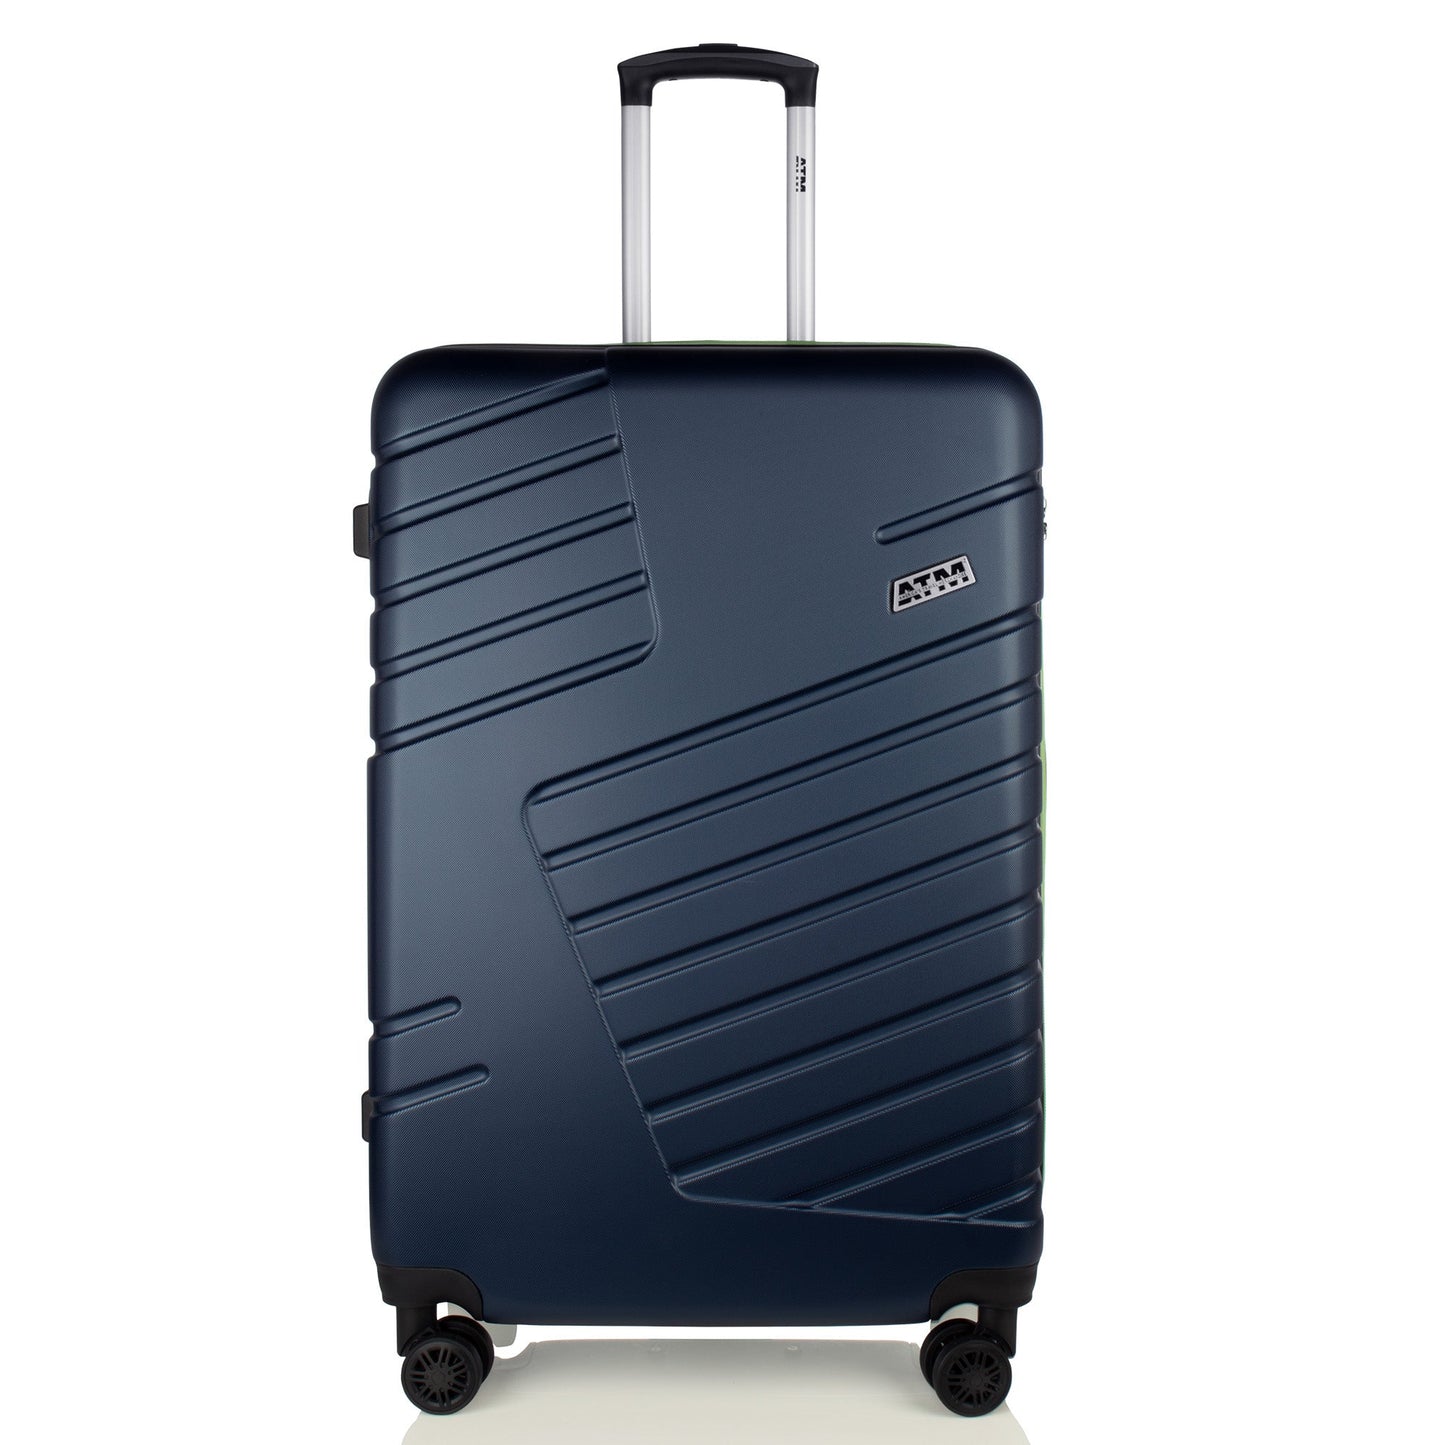 LUCKY Collection Blue Luggage (21/25/29") Suitcase Lock Spinner Hardshell